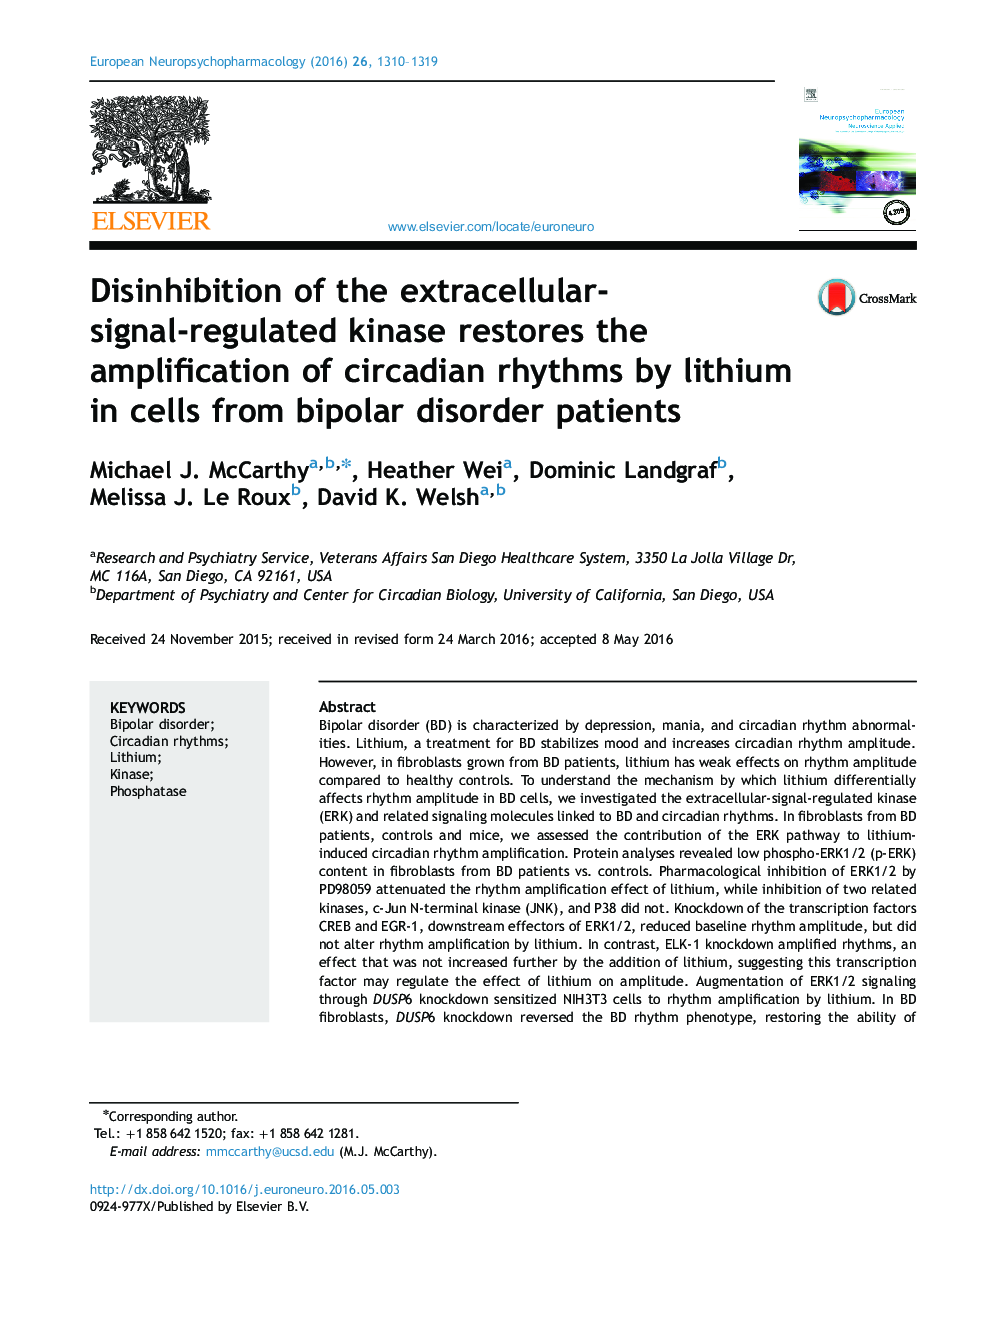 Disinhibition of the extracellular-signal-regulated kinase restores the amplification of circadian rhythms by lithium in cells from bipolar disorder patients